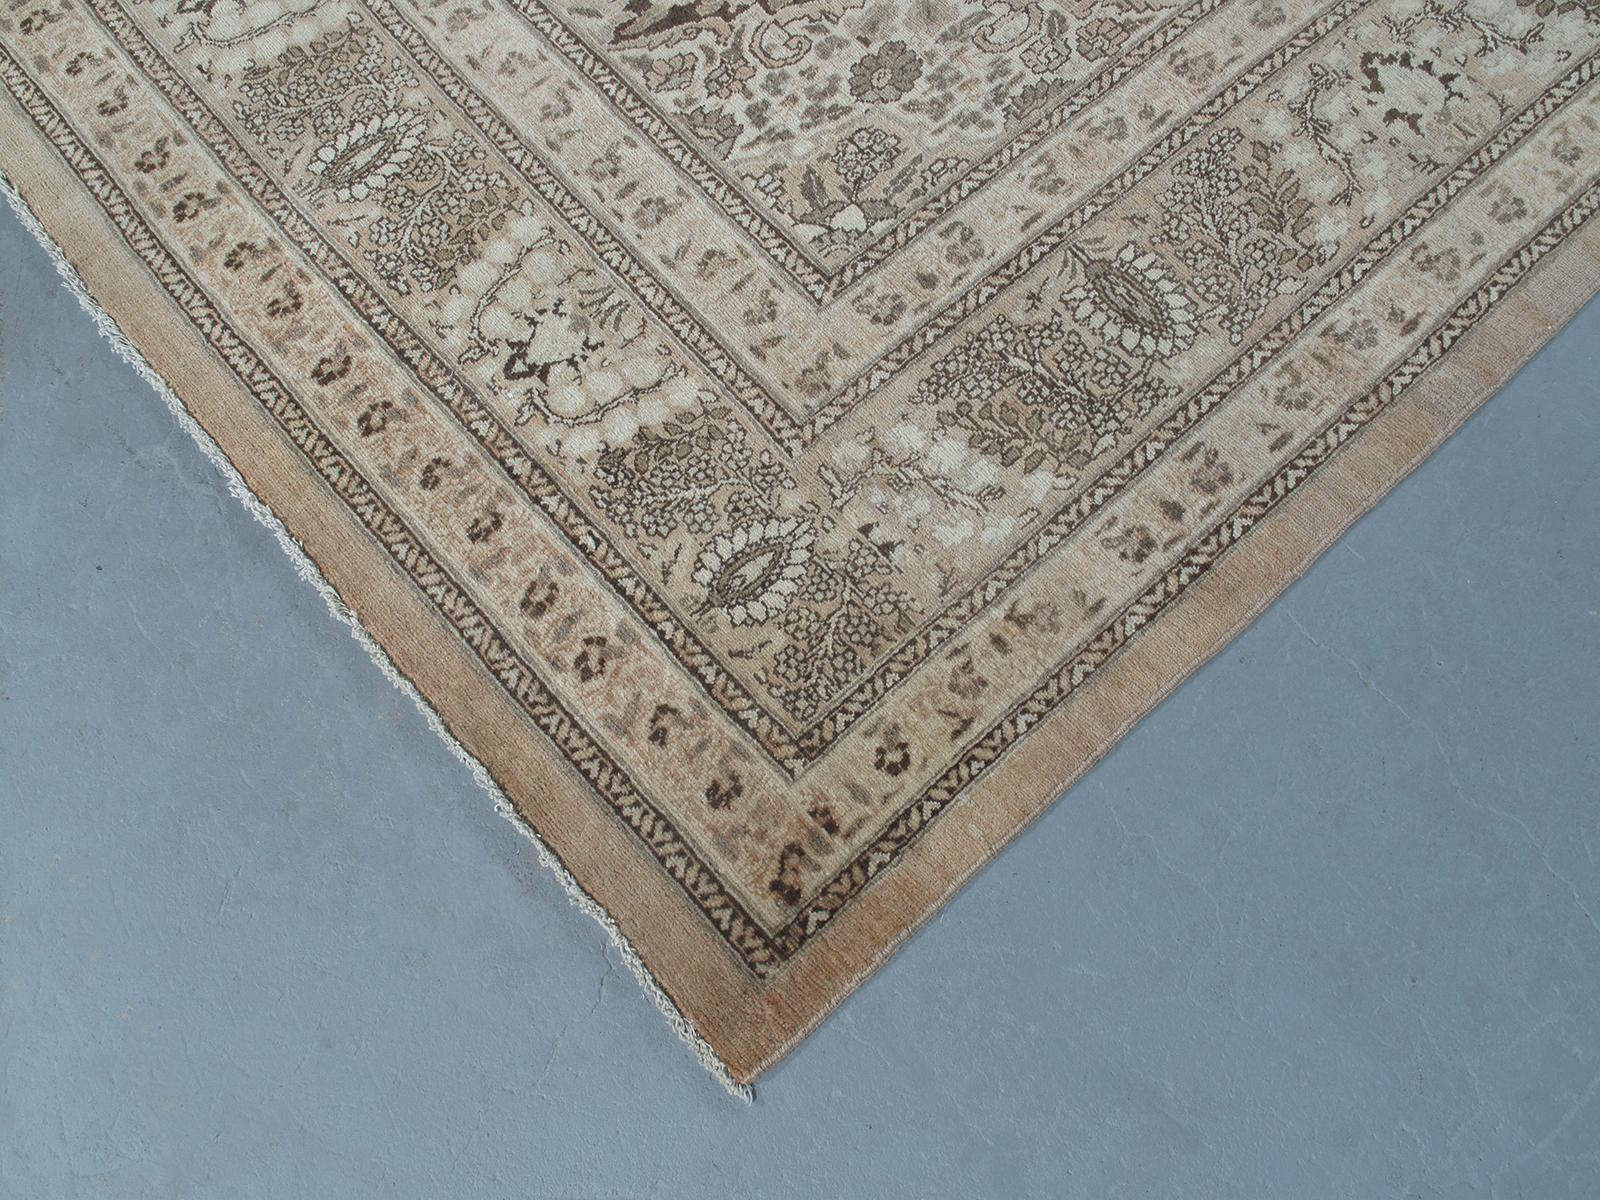 Antique Persian Tabriz Hadji Jalili Handknotted Rug in Beige and Brown Color In Good Condition For Sale In New York, NY